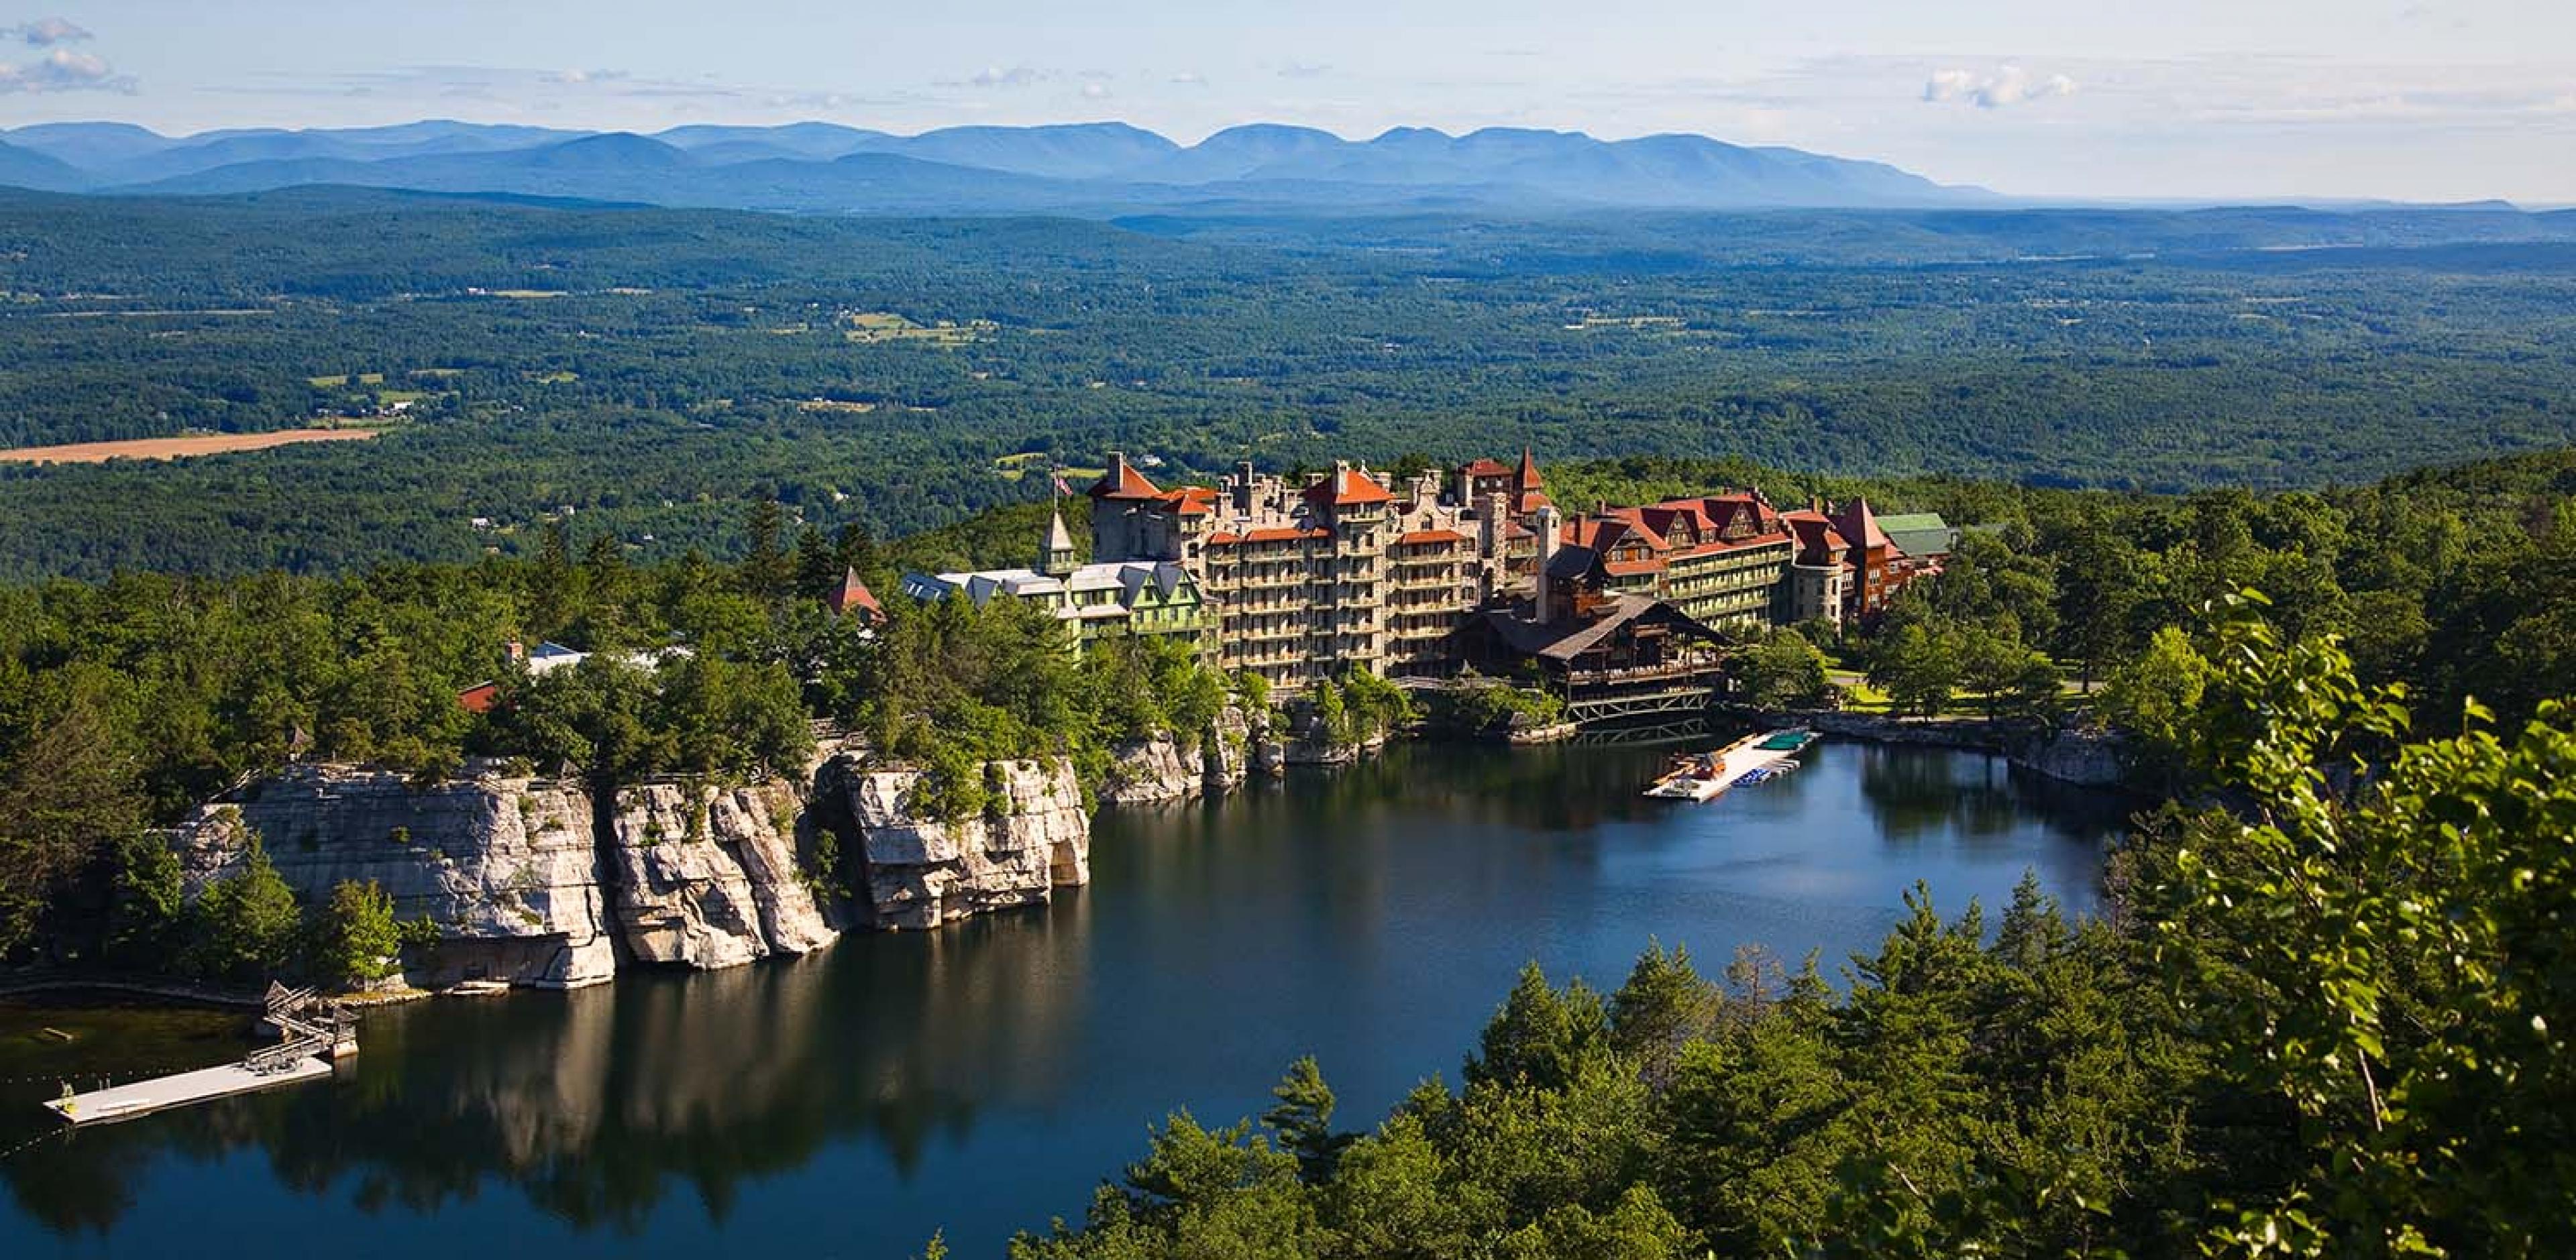 Mohonk Mountain House in the Hudson Valley - Courtesy Mohunk Mountain House